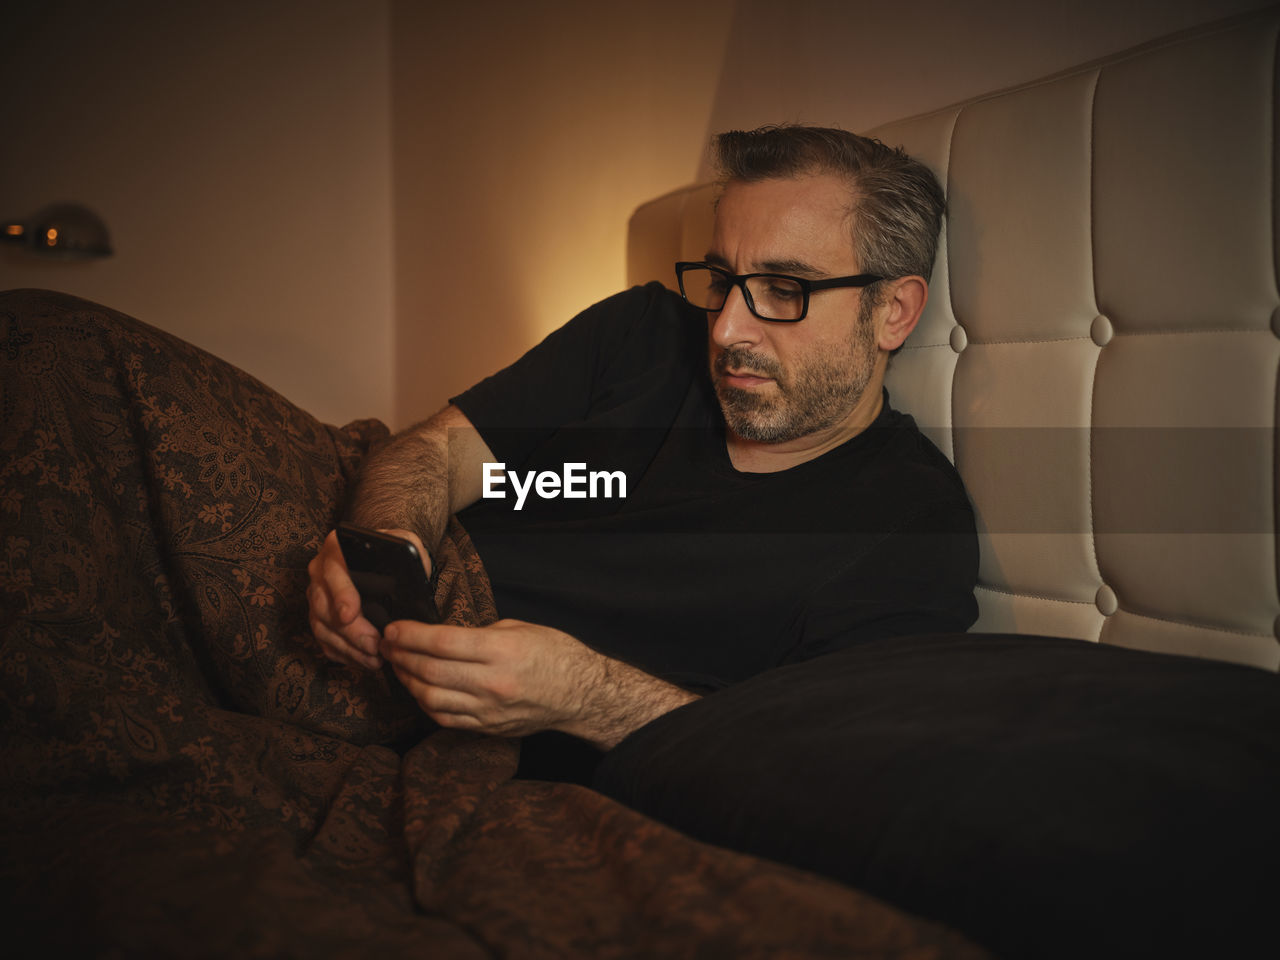 Relaxed and serious man in bed reading on the internet with a smartphone before sleeping and resting